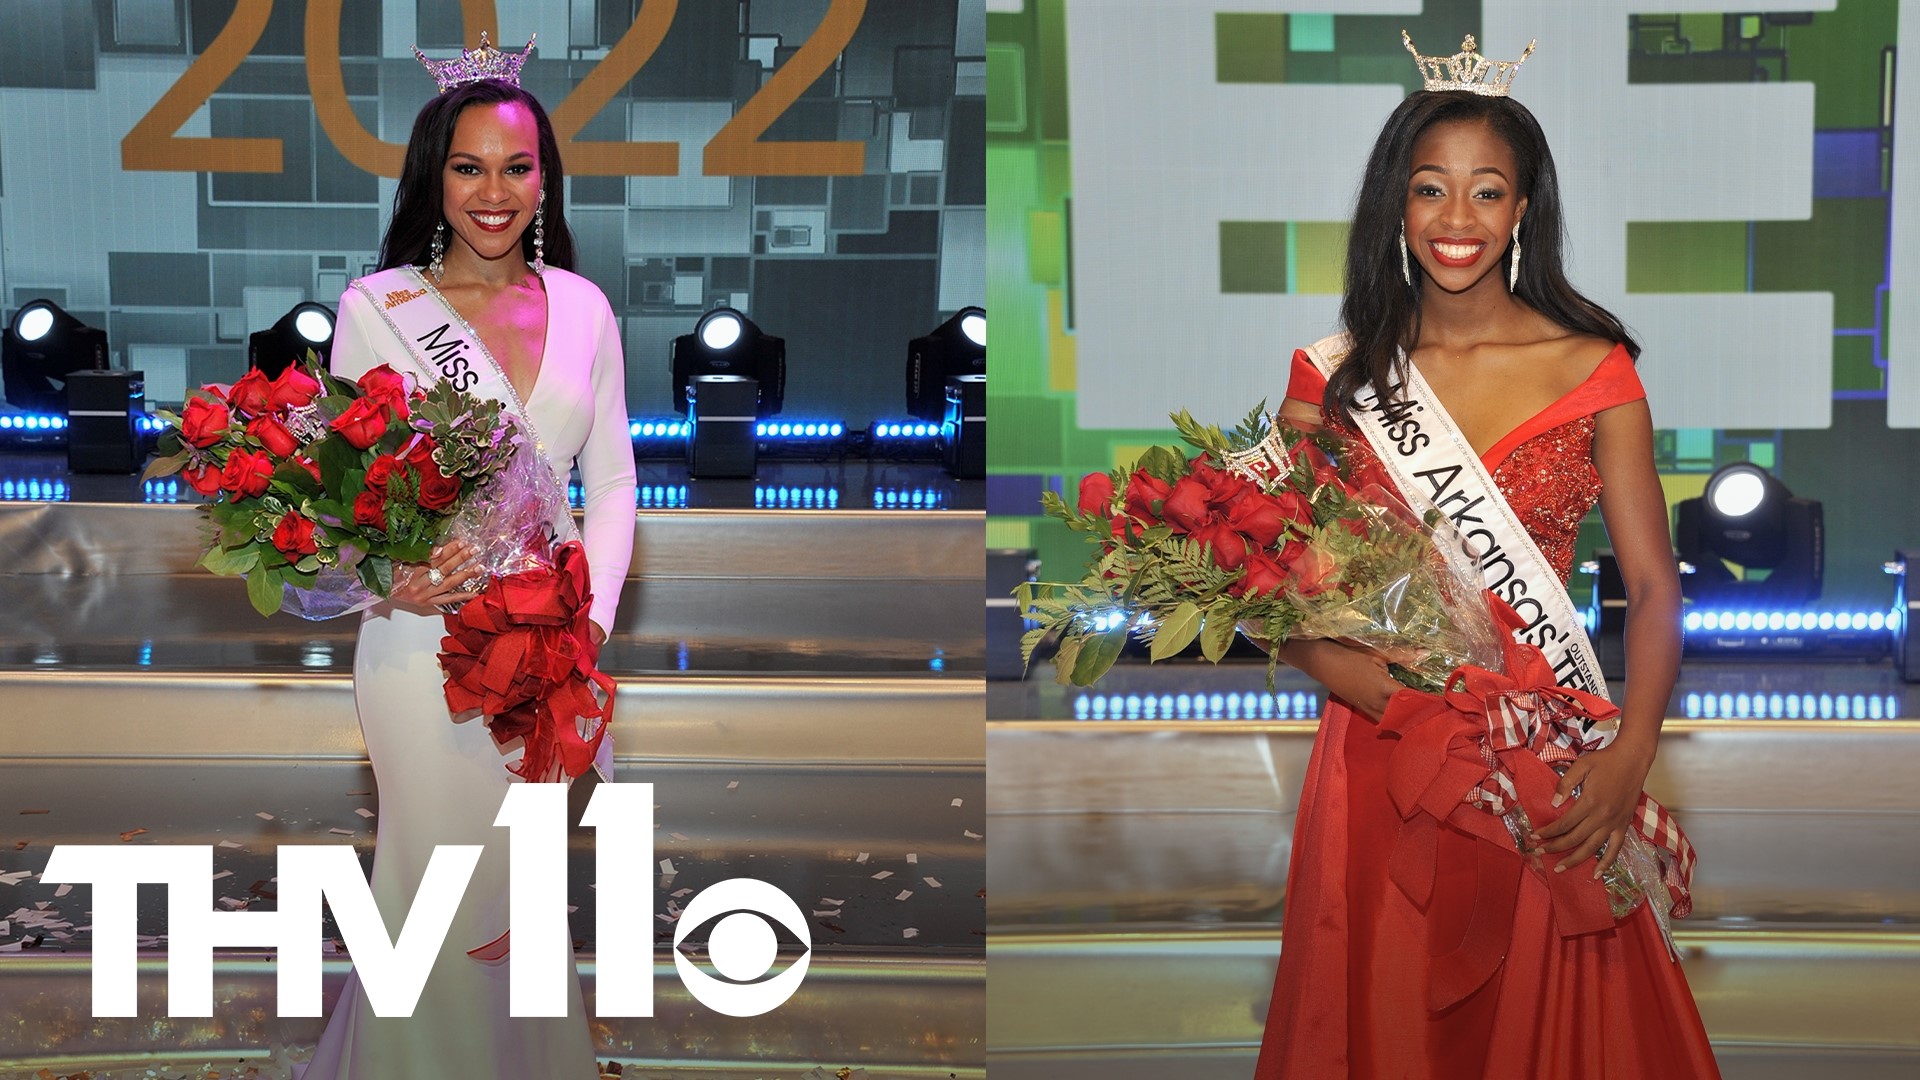 The Miss Arkansas organization confirmed this is the first time in state history that both Miss Arkansas and Miss Arkansas Outstanding Teen are Black women.